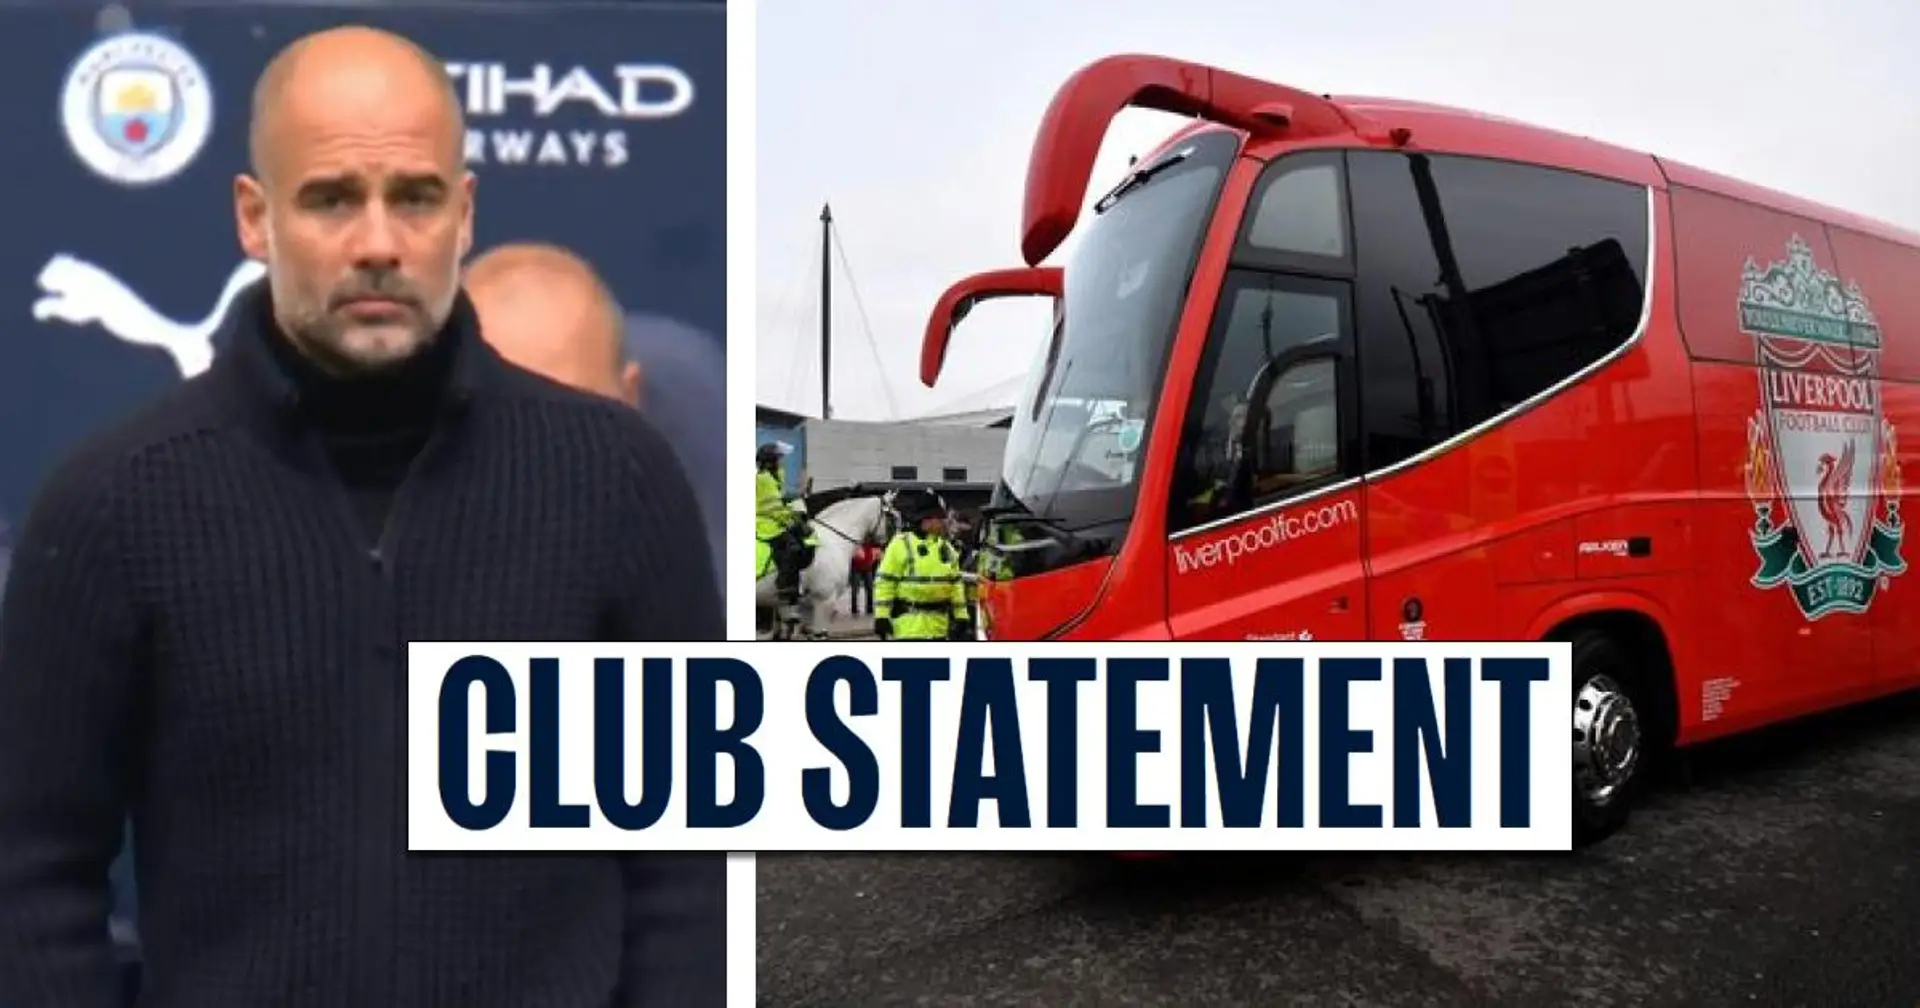 Brick reportedly cracks window of Liverpool coach on way from Etihad, Man City release statement